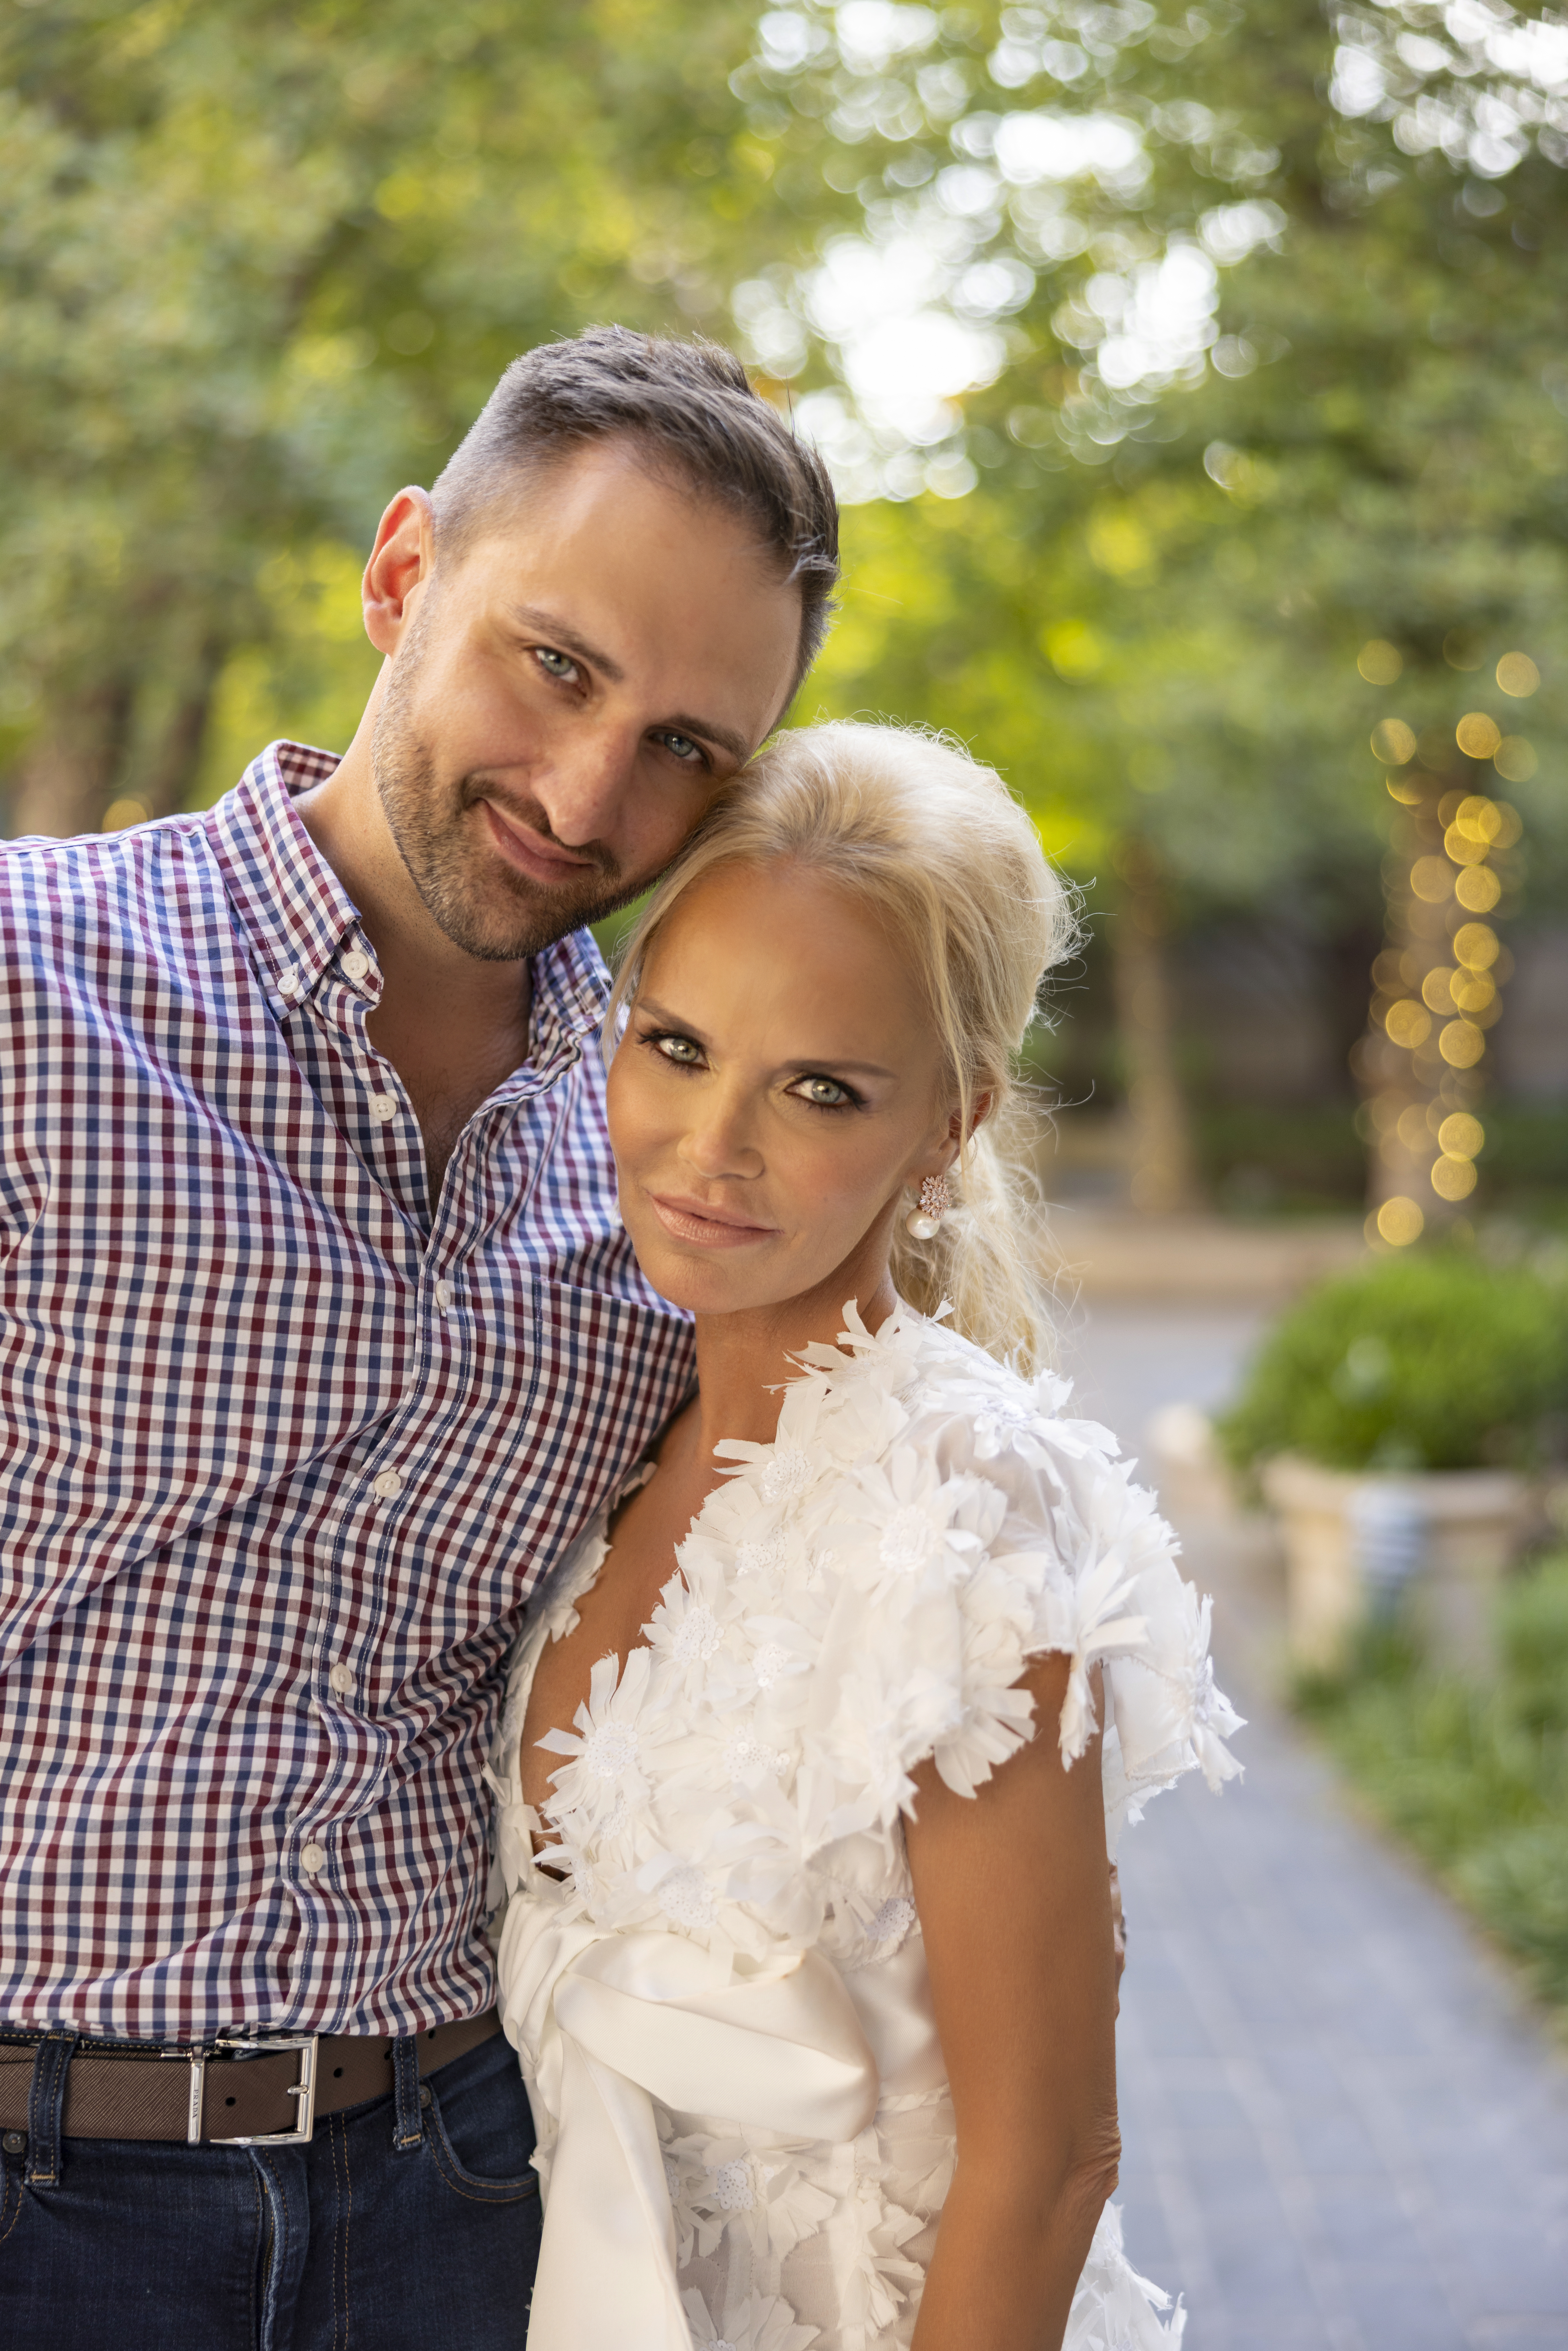 An engagement portrait for Josh Bryant and Kristin Chenoweth's rehearsal dinner outside during golden hour.